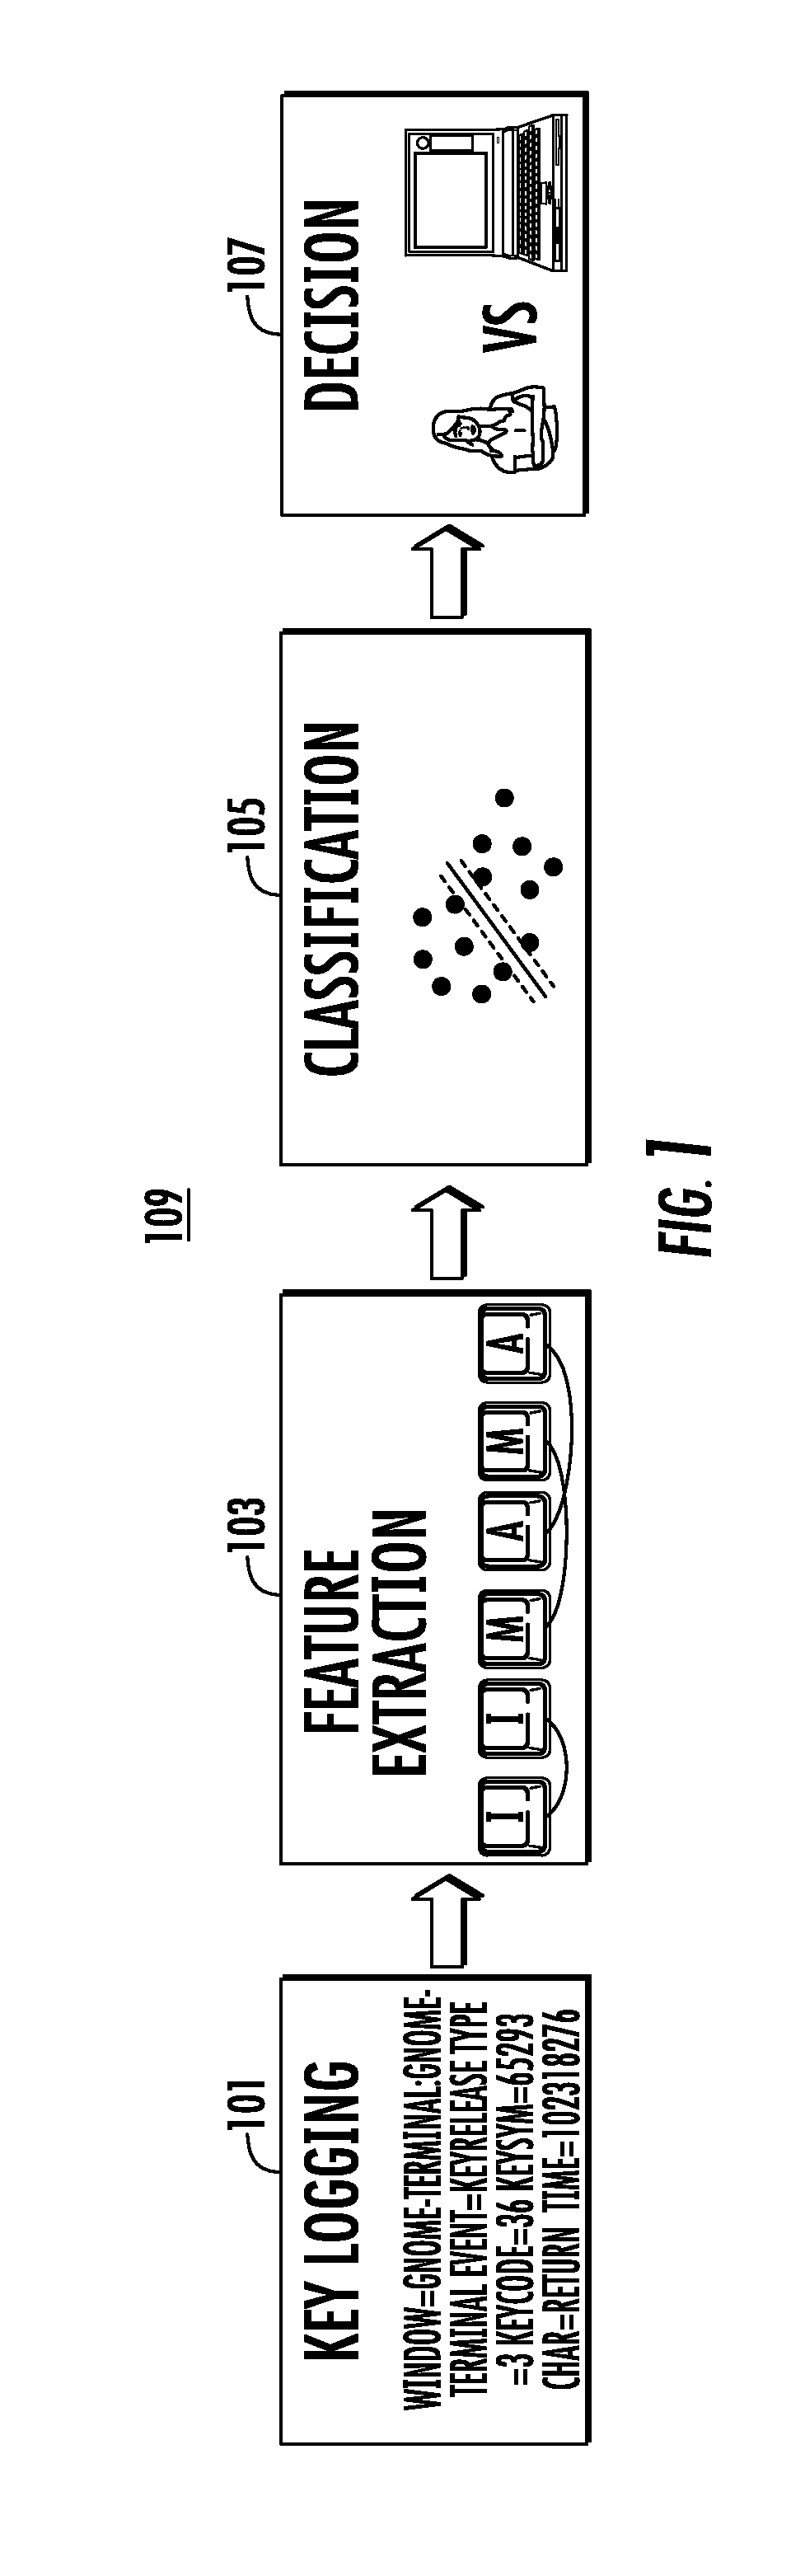 Systems and method for malware detection